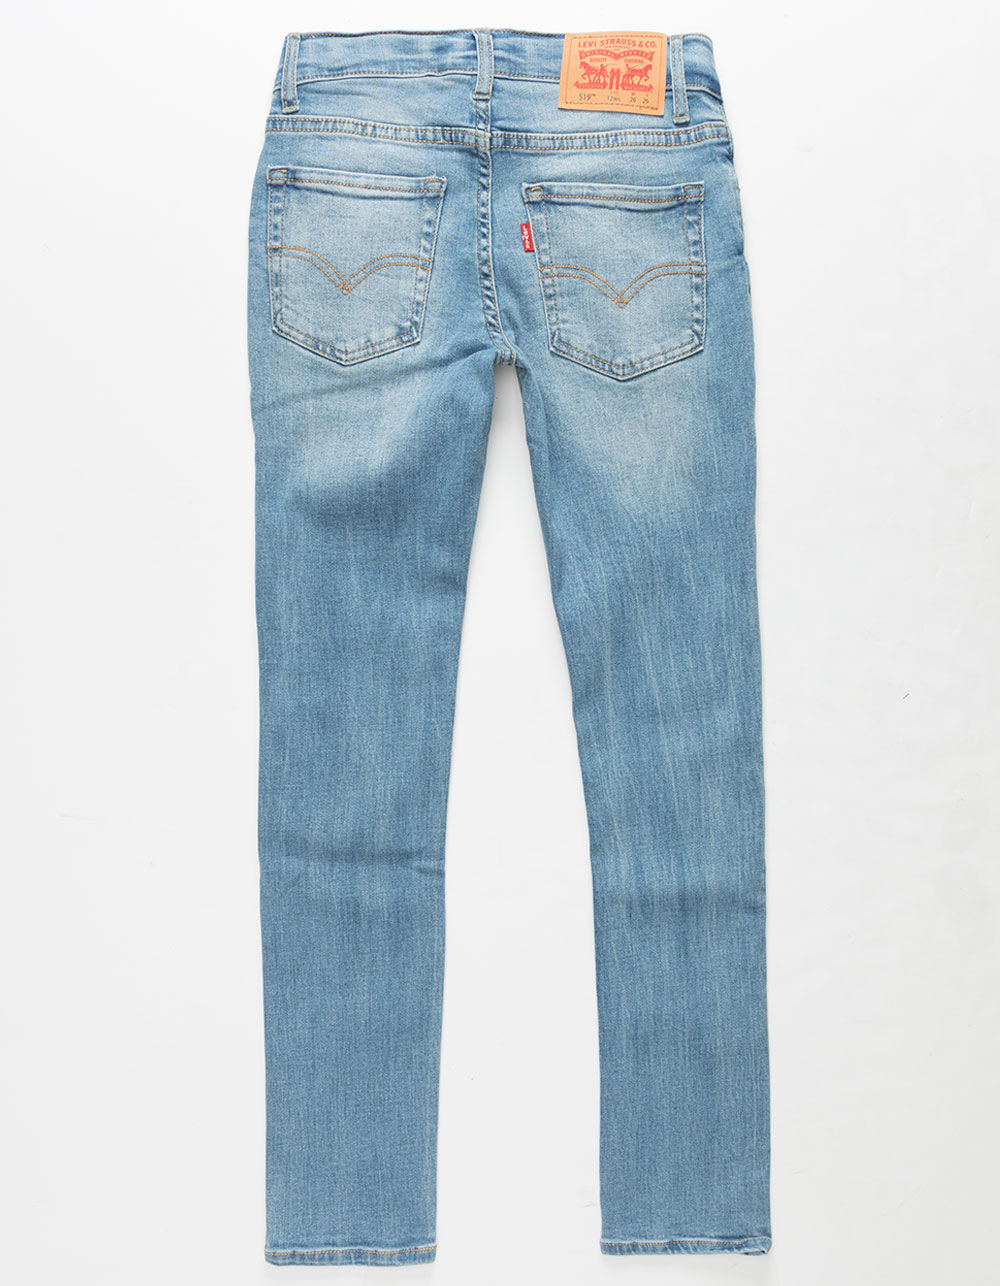 LEVI'S 519 Extreme Skinny Boys Stretch Jeans image number 1